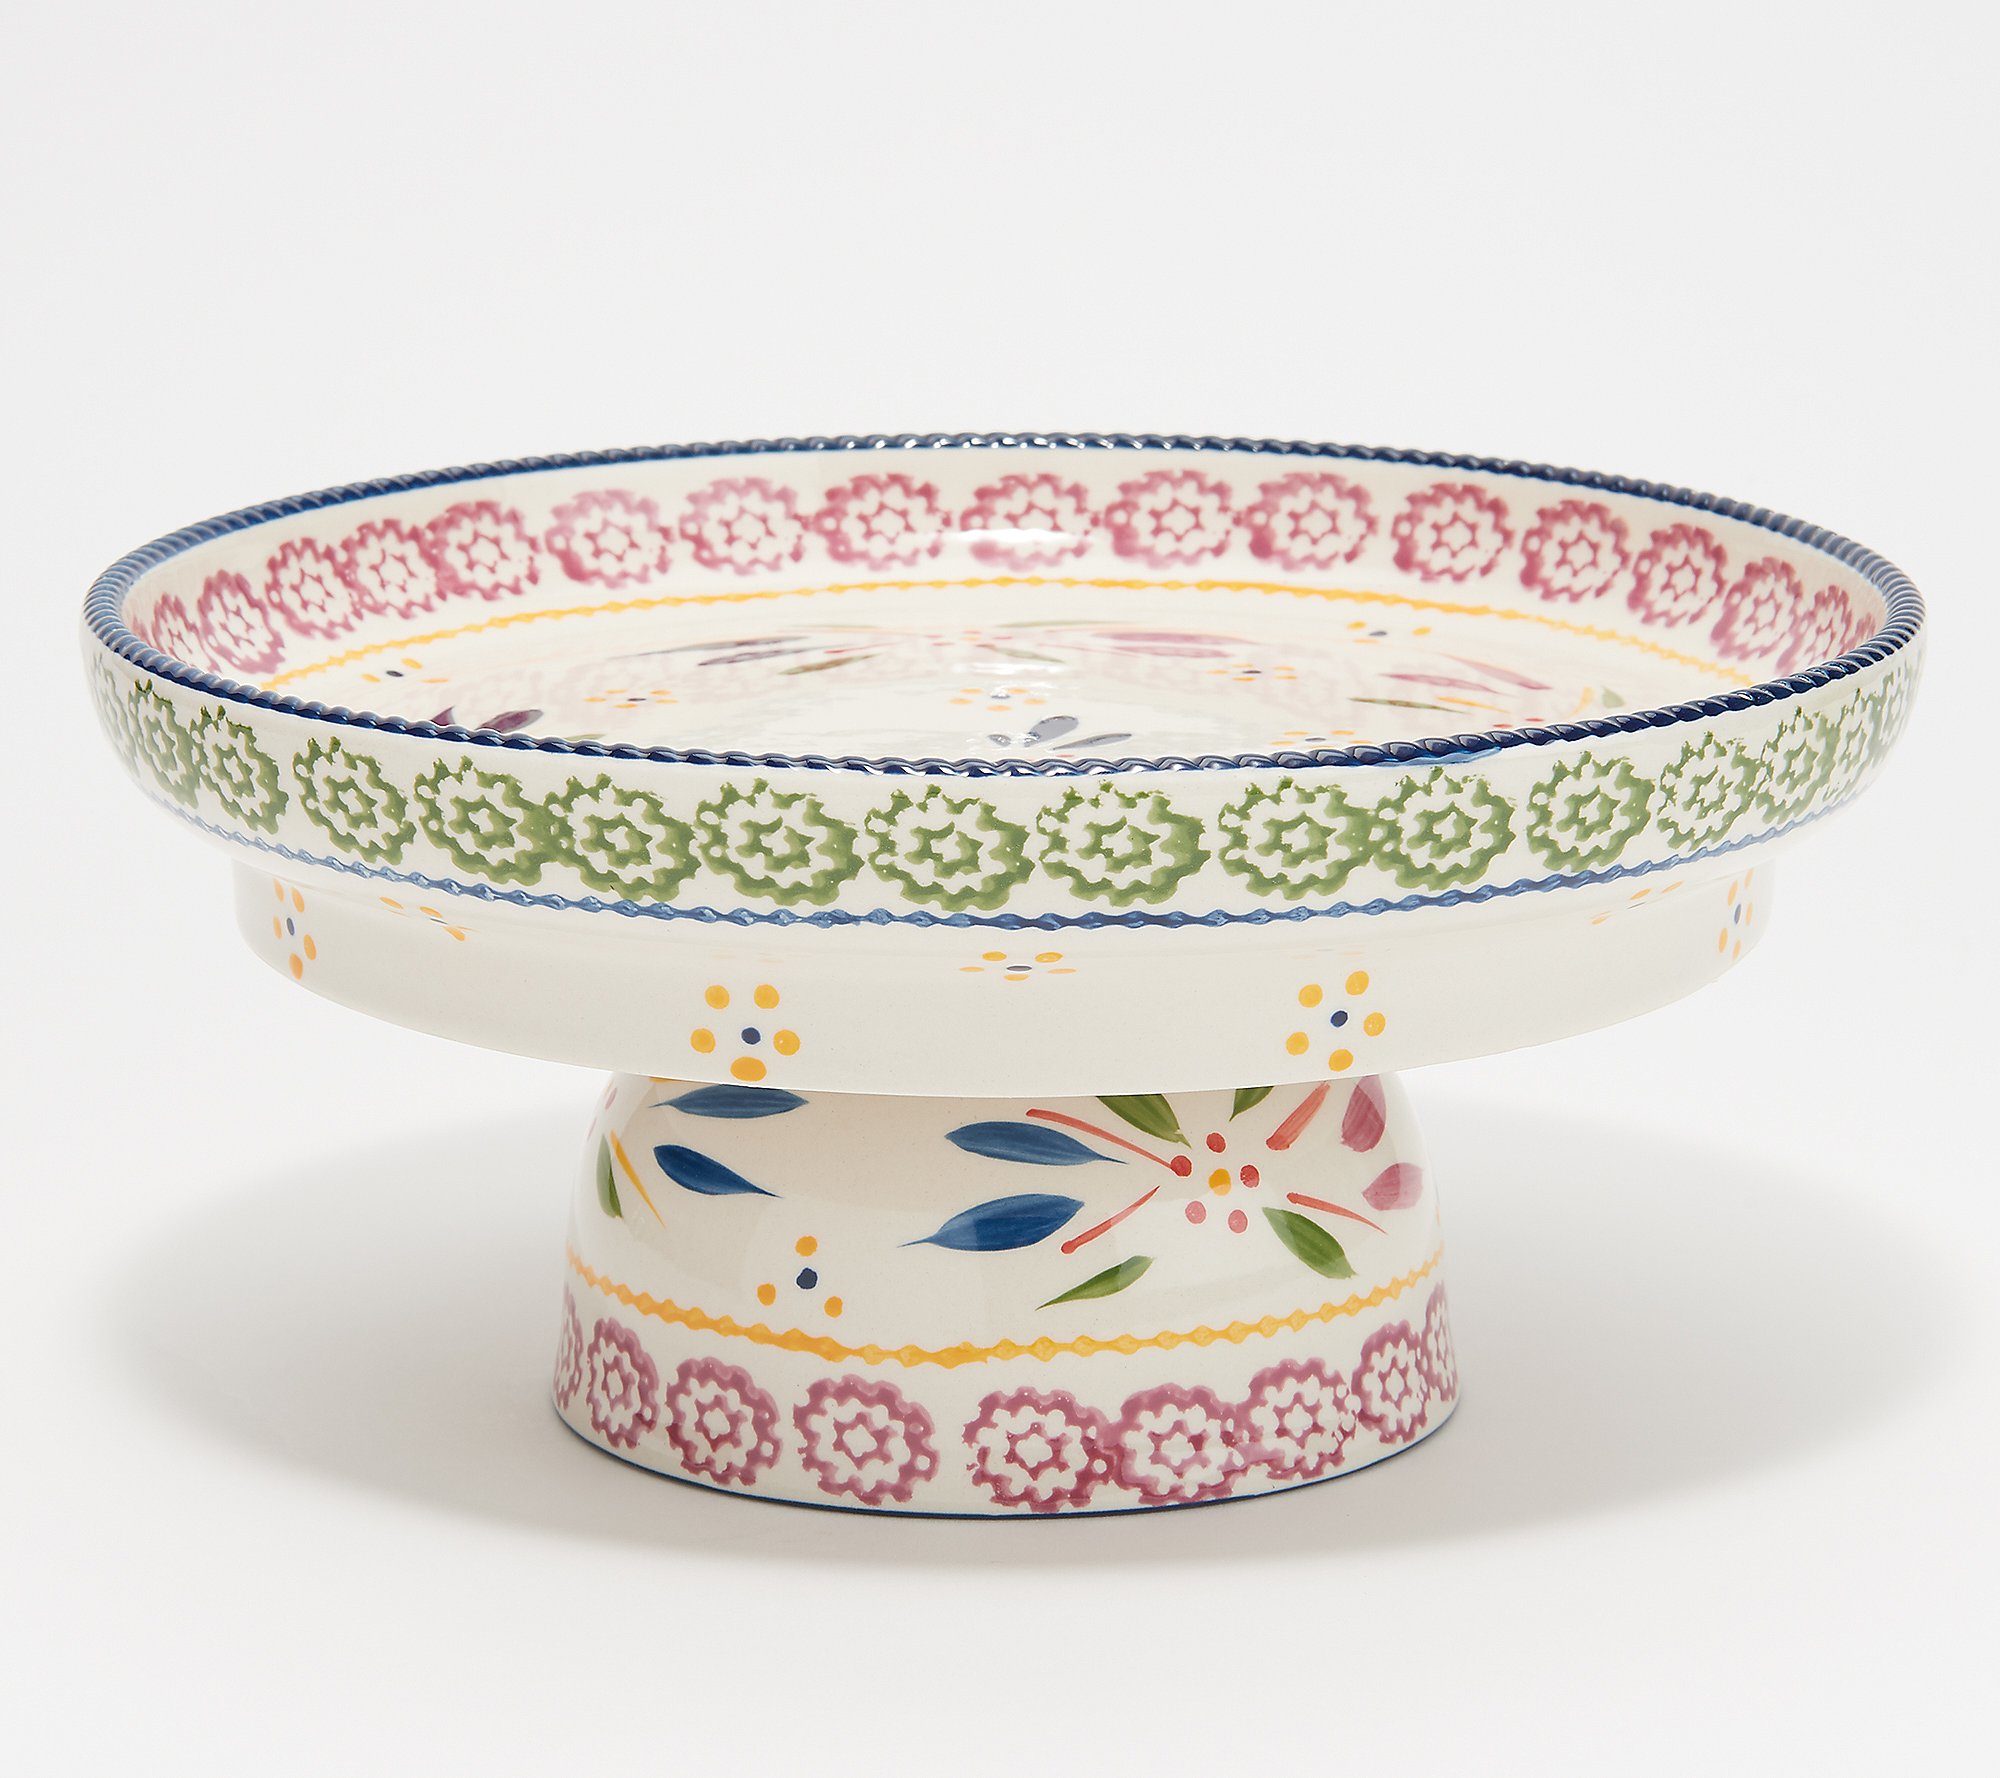 Temp-tations Ovenware by Tara Footed Cake Stand Temp-tations Old World Green Pattern Pie Cake Stand